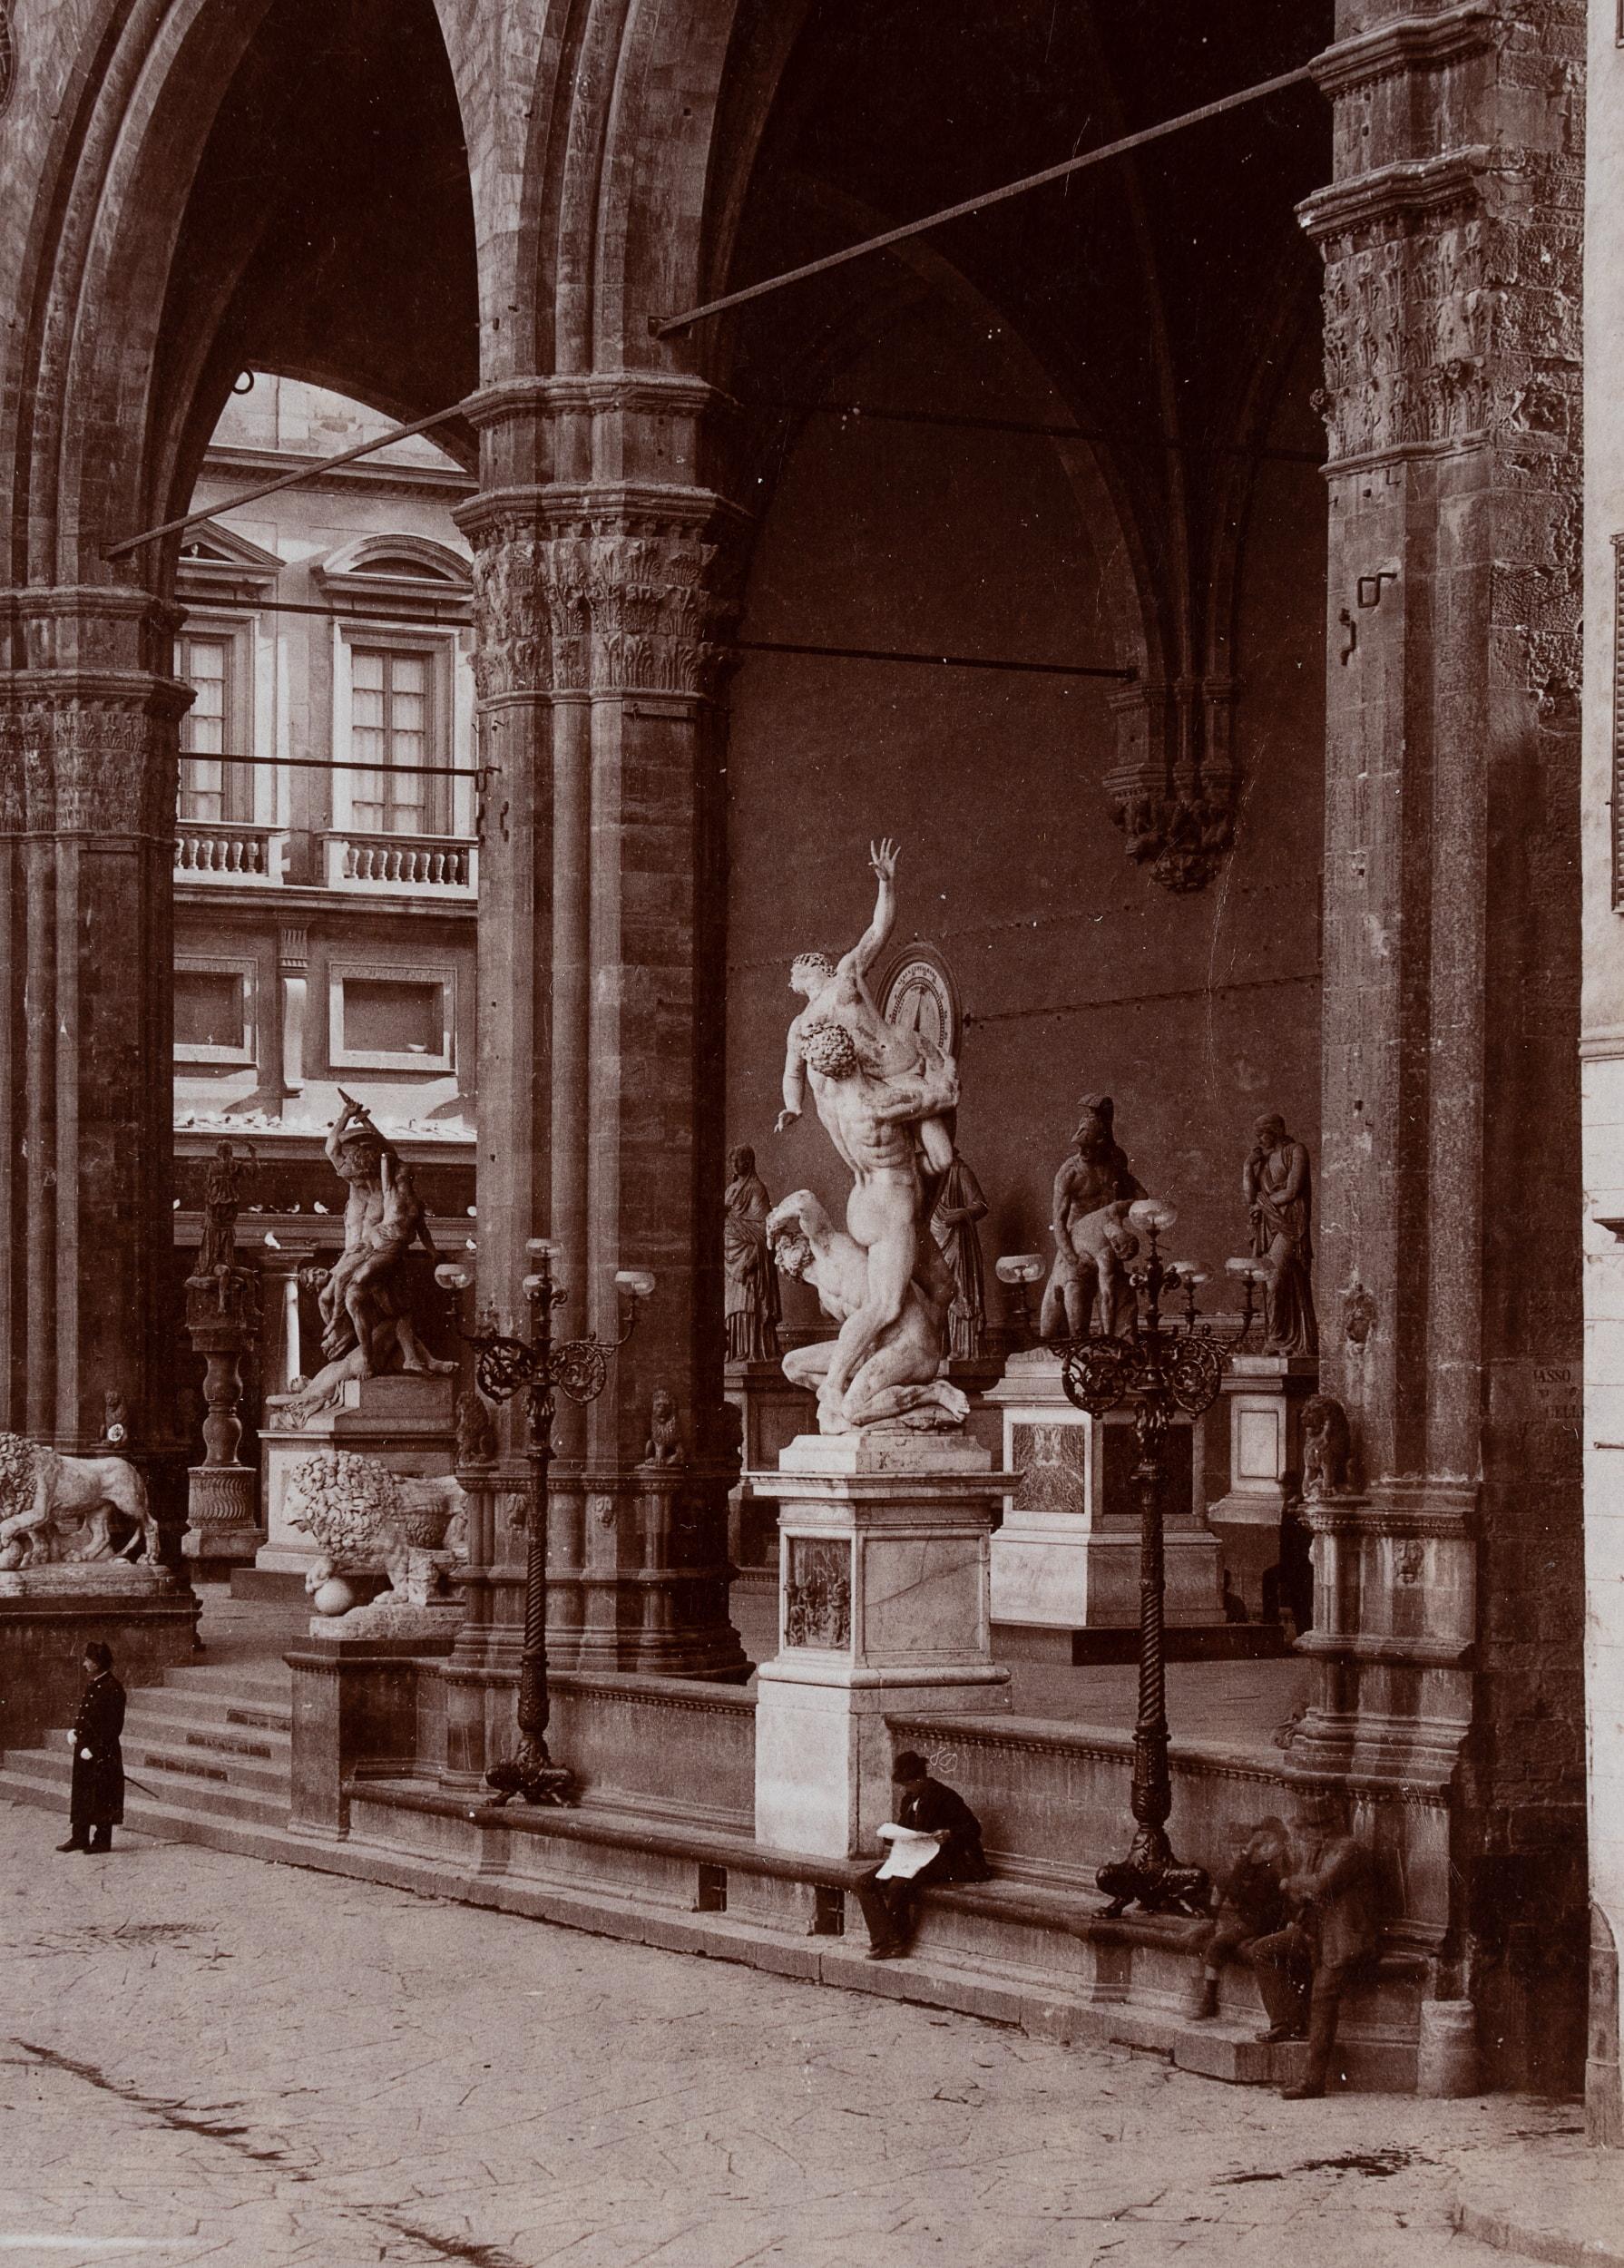 Fratelli Alinari (19th century): View of the Loggia dei Lanzi with the impressive Roman statues and isolated passers-by on the forecourt, c. 1890, albumen paper print

Technique: albumen paper print, mounted on Cardboard

Inscription: Lower middle